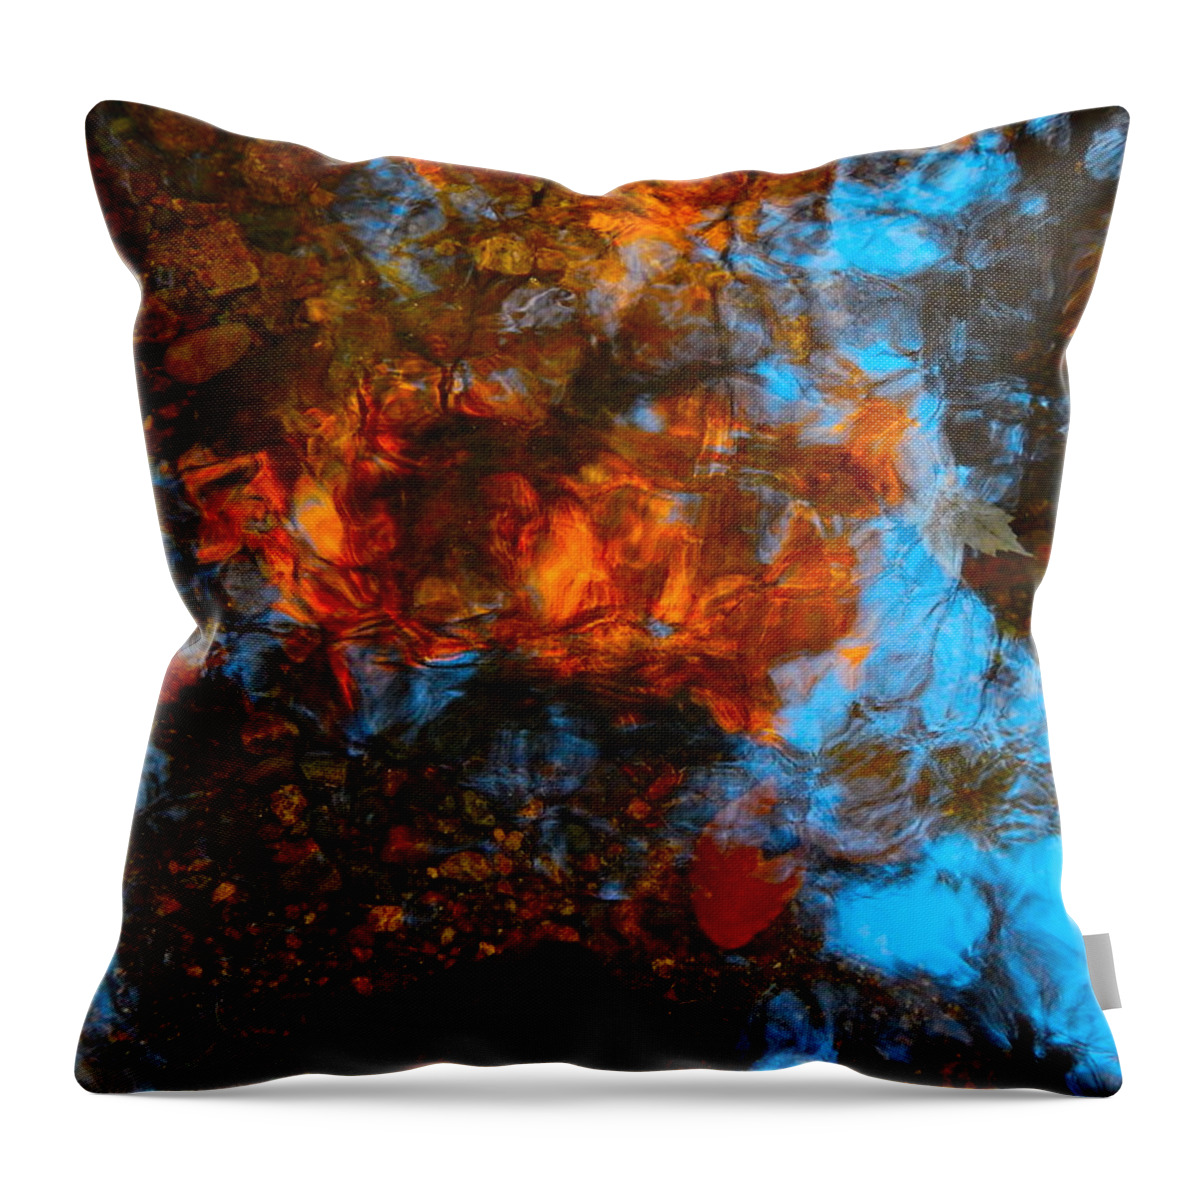 Autumn Landscape Throw Pillow featuring the photograph Autumn B 2015 35 by George Ramos